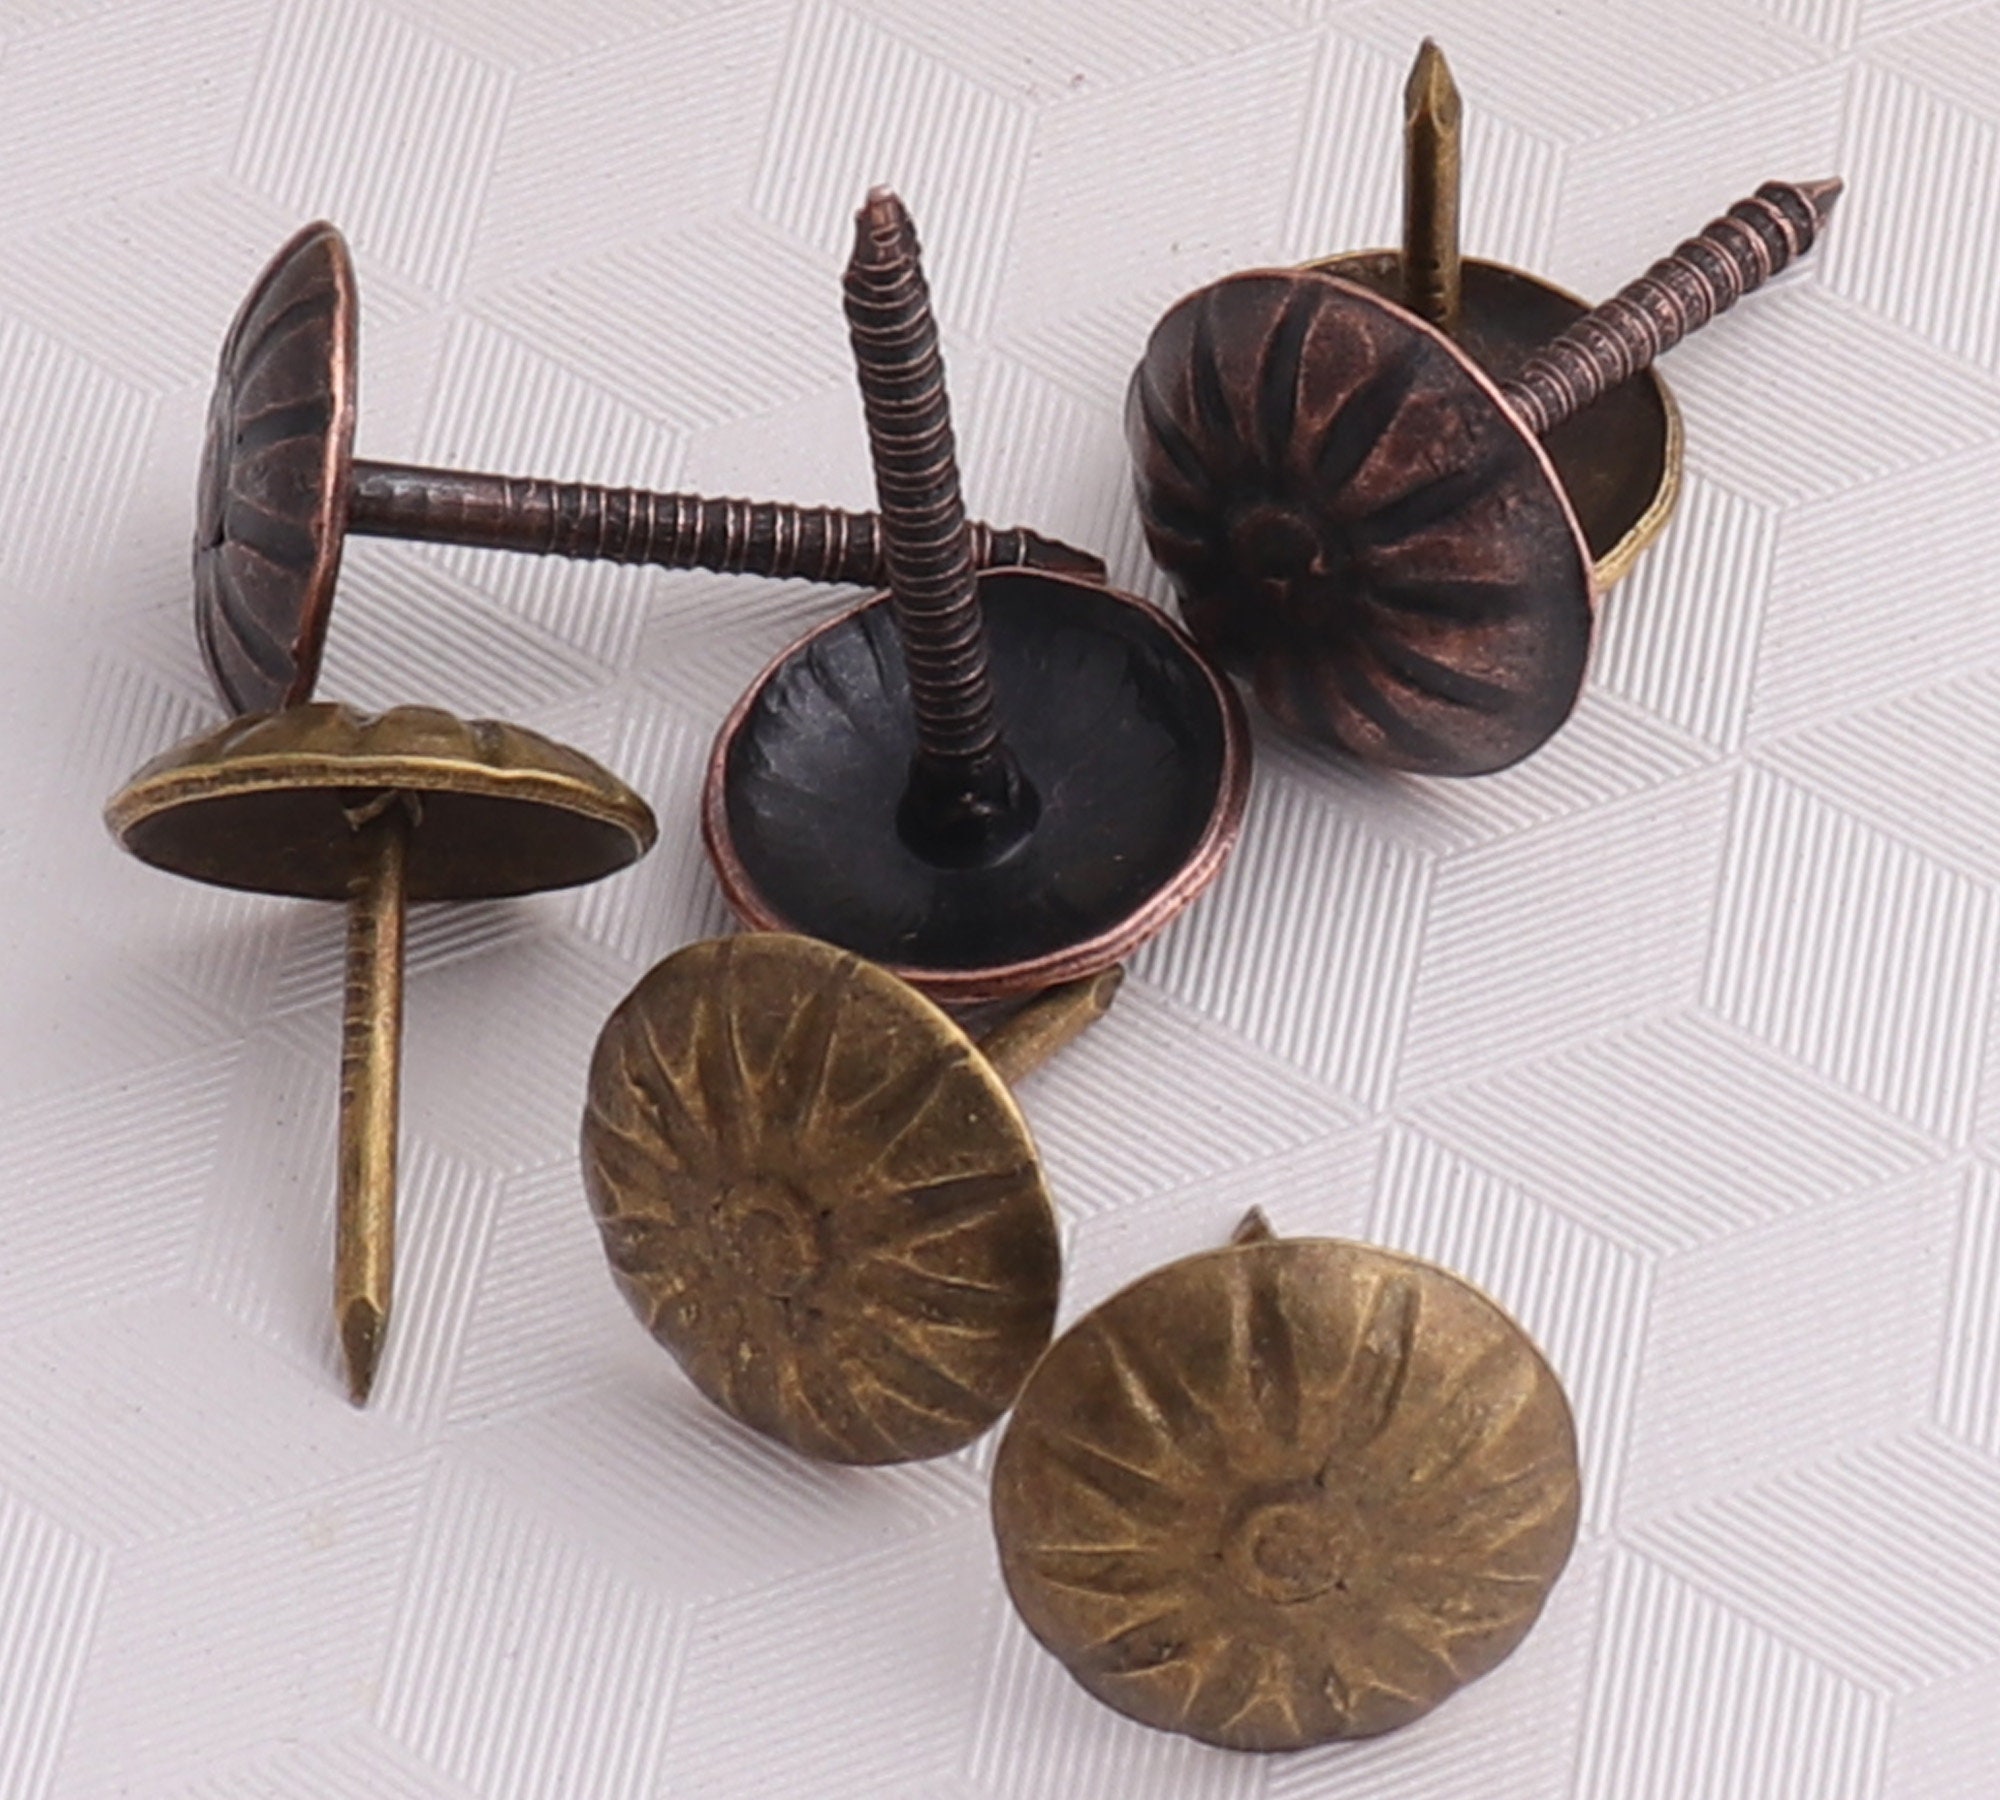 Small Tiny Round Dome Head Upholstery Thumb Tack Nail Screw Pin Bronze  Brass Gold Silver Iron Furniture Decor Hardware Door Sofa Couch 